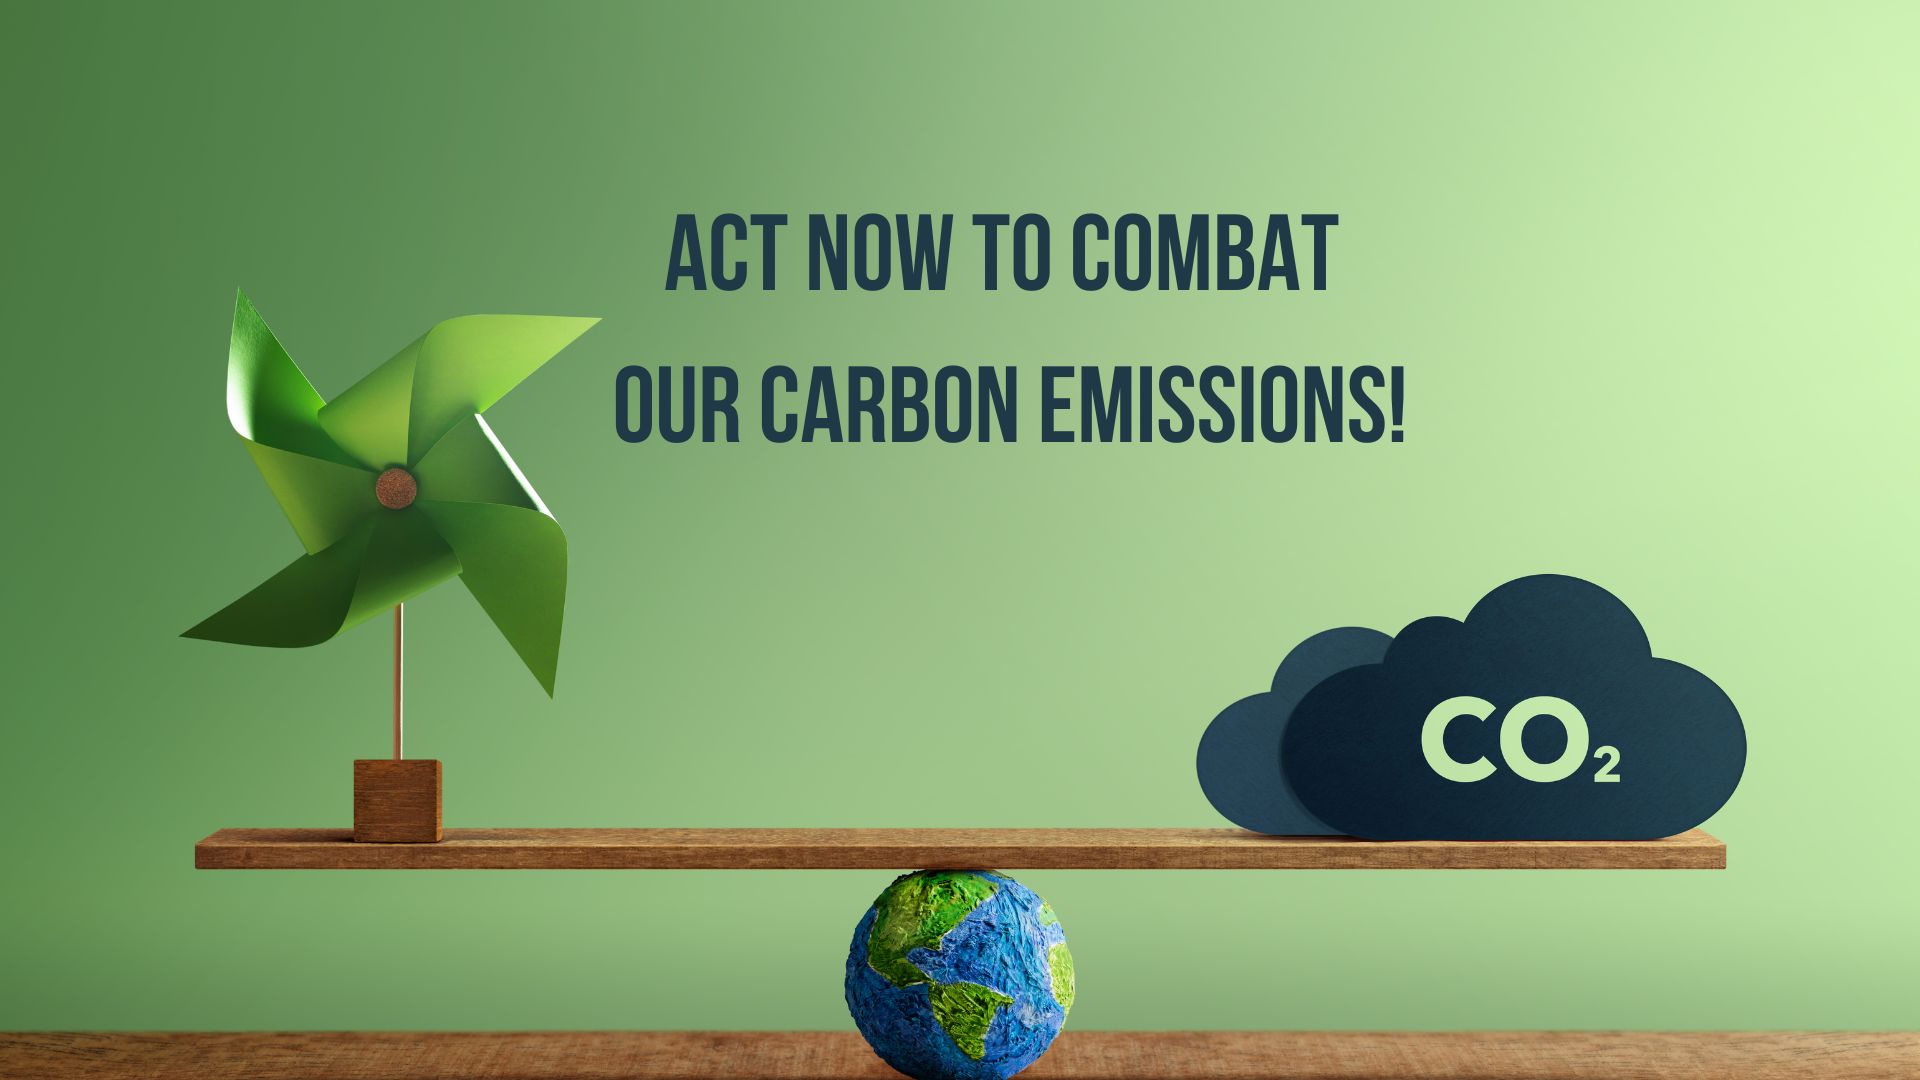 Act now to combat climate change